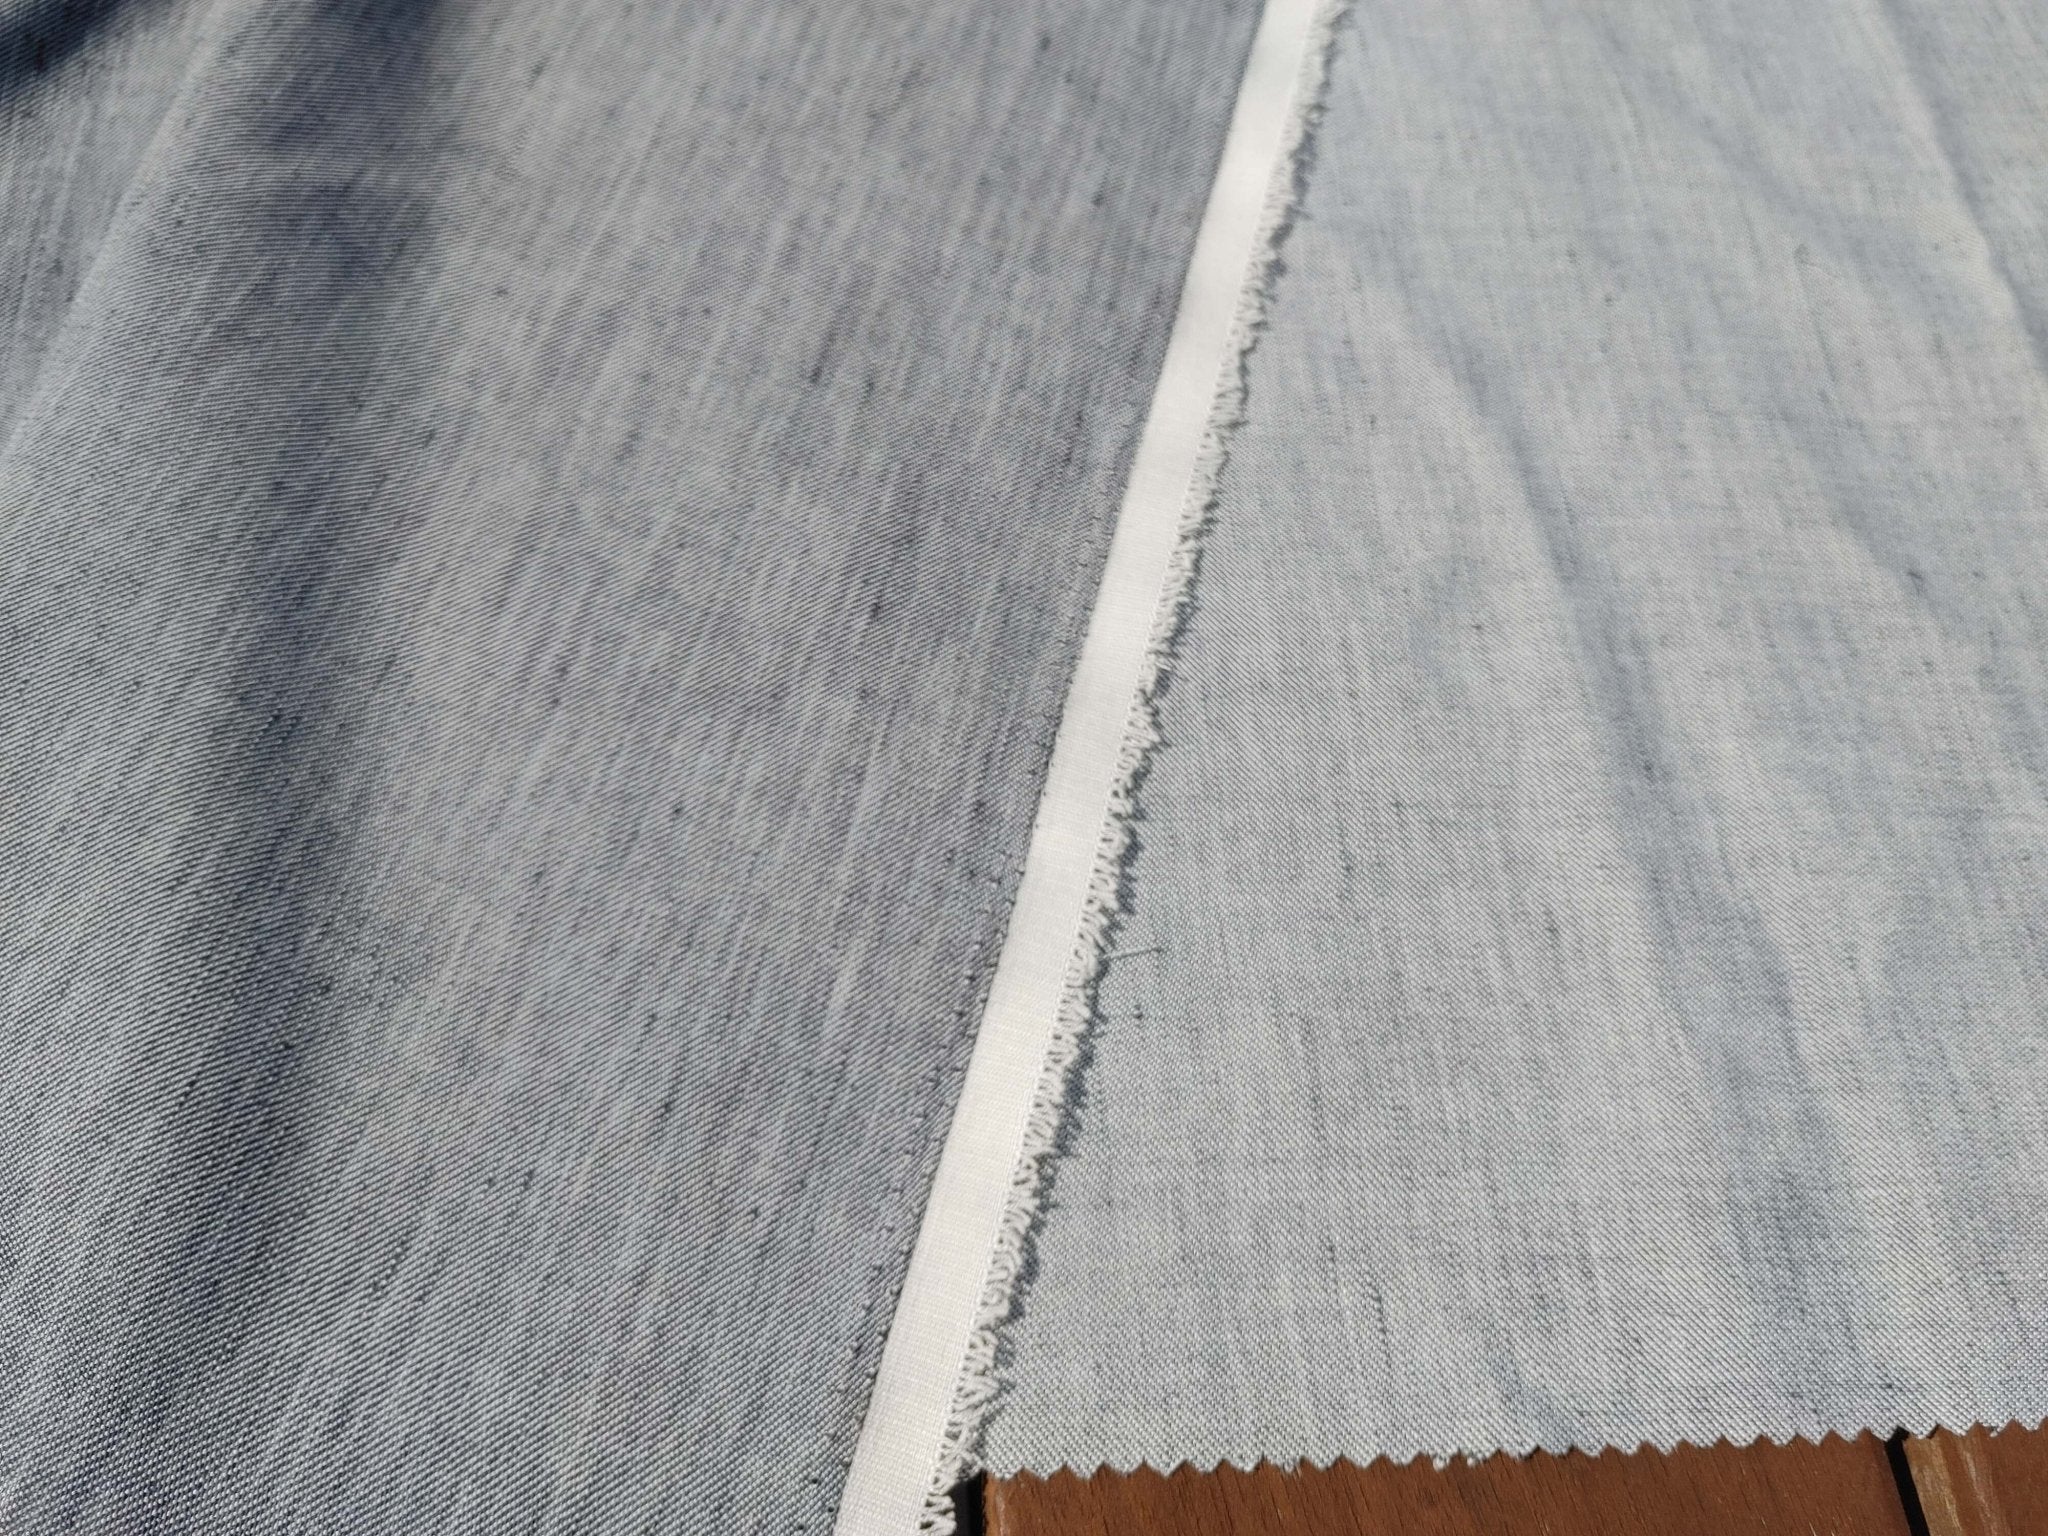 Linen Cotton Rayon Twill Fabric: Denim-Inspired Style 7321 - The Linen Lab - Navy